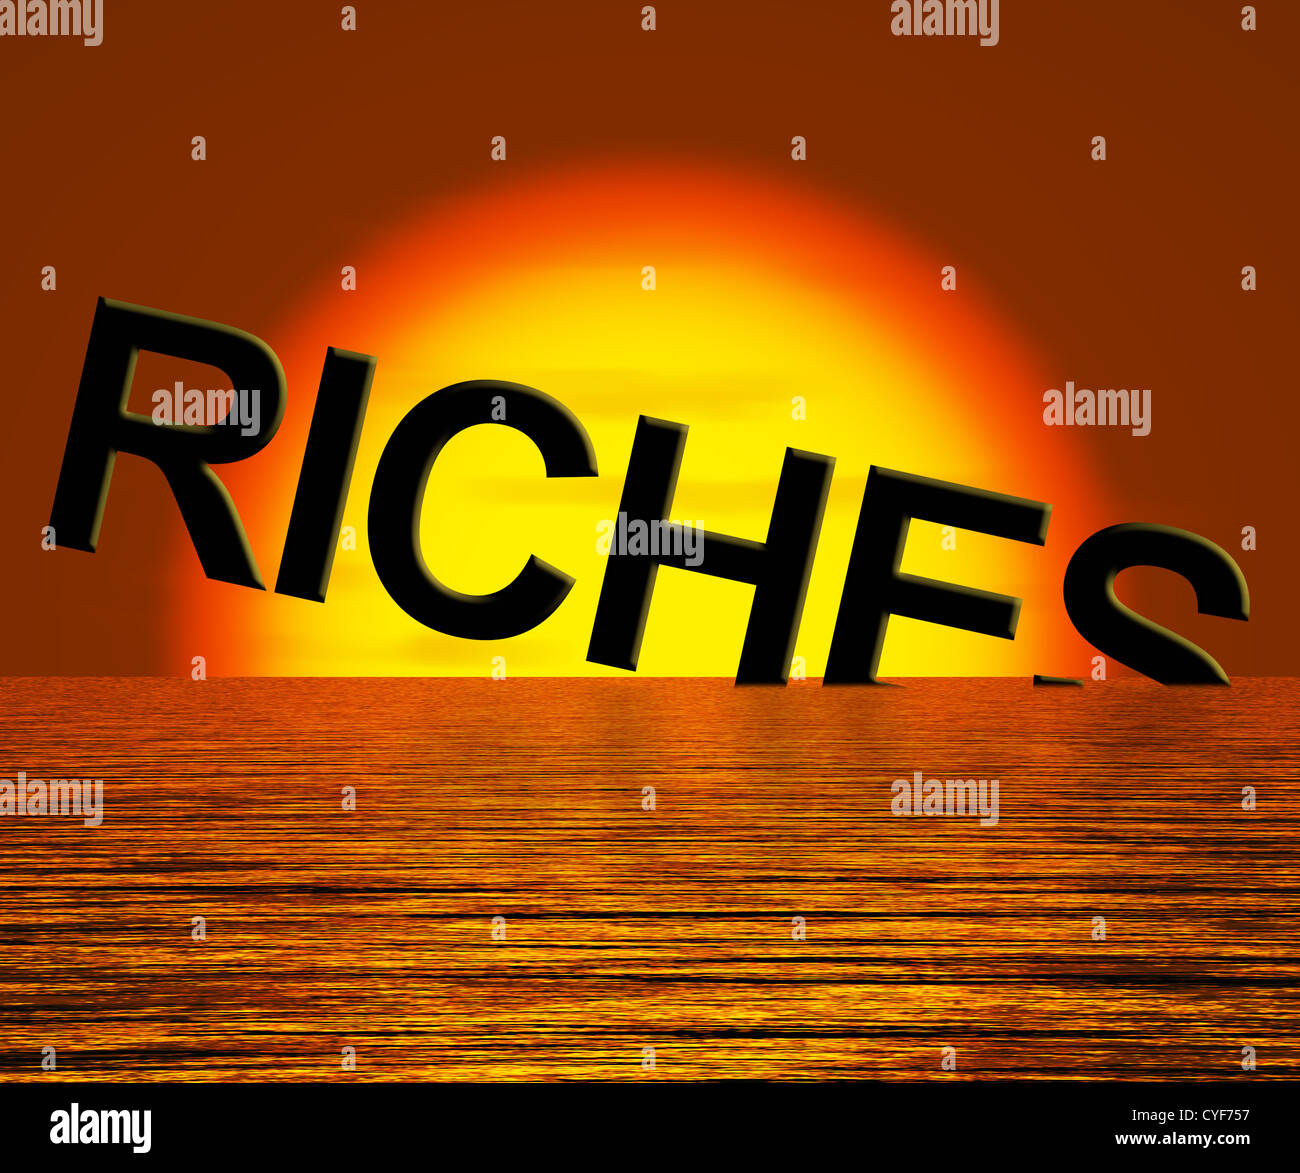 Riches Word Sinking Showing Difficulty Getting Rich Or Wealthy Stock Photo